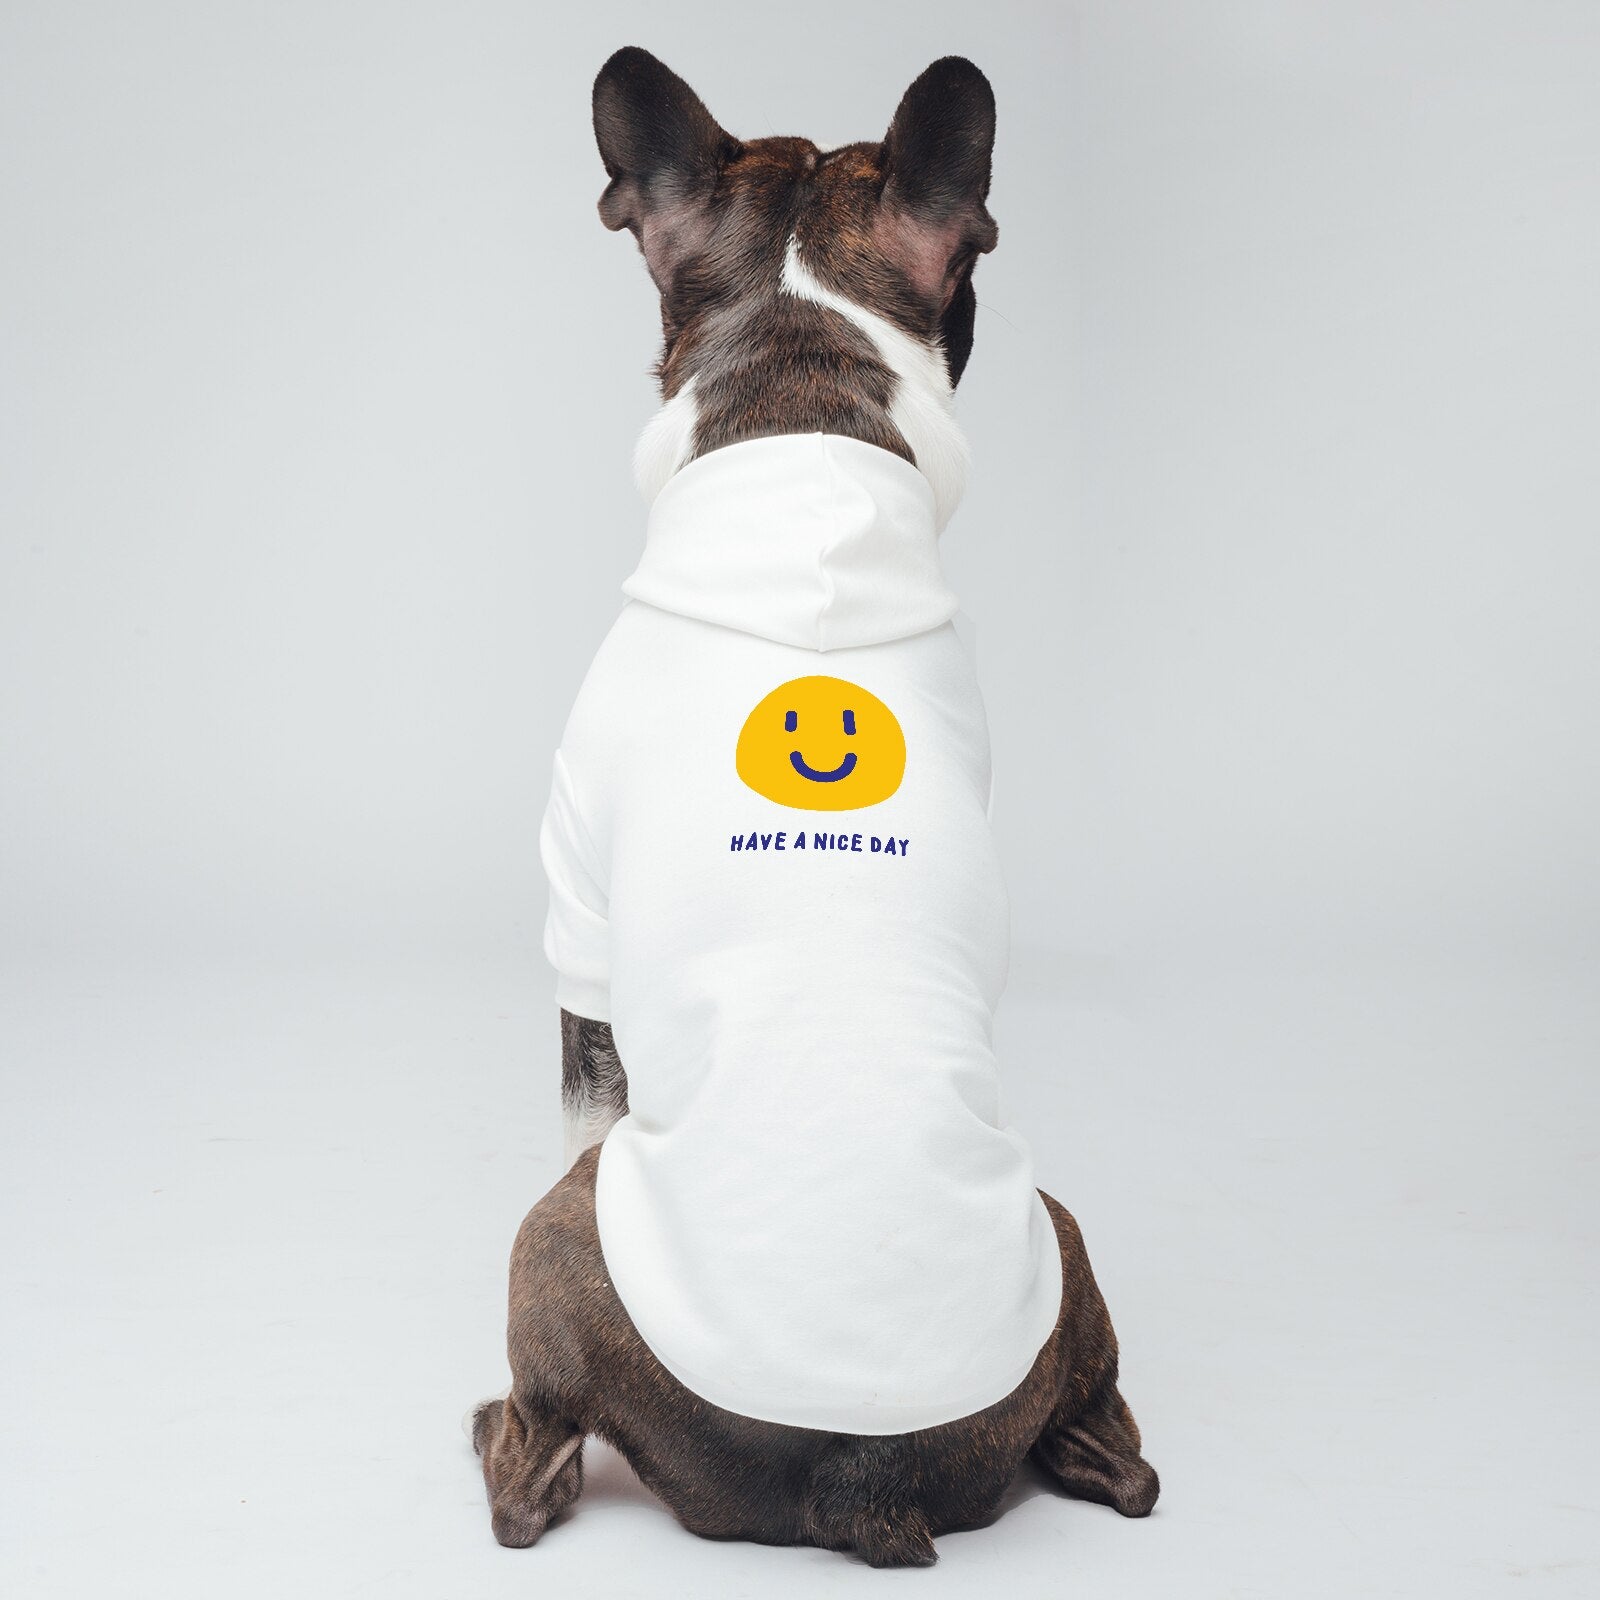 Smile Face Printed Pet Hoodies Stripe White Red, Cute Funny Sweet Cool Dogs Cats Clothes, Apparel for Chihuahua Yorkshire etc.